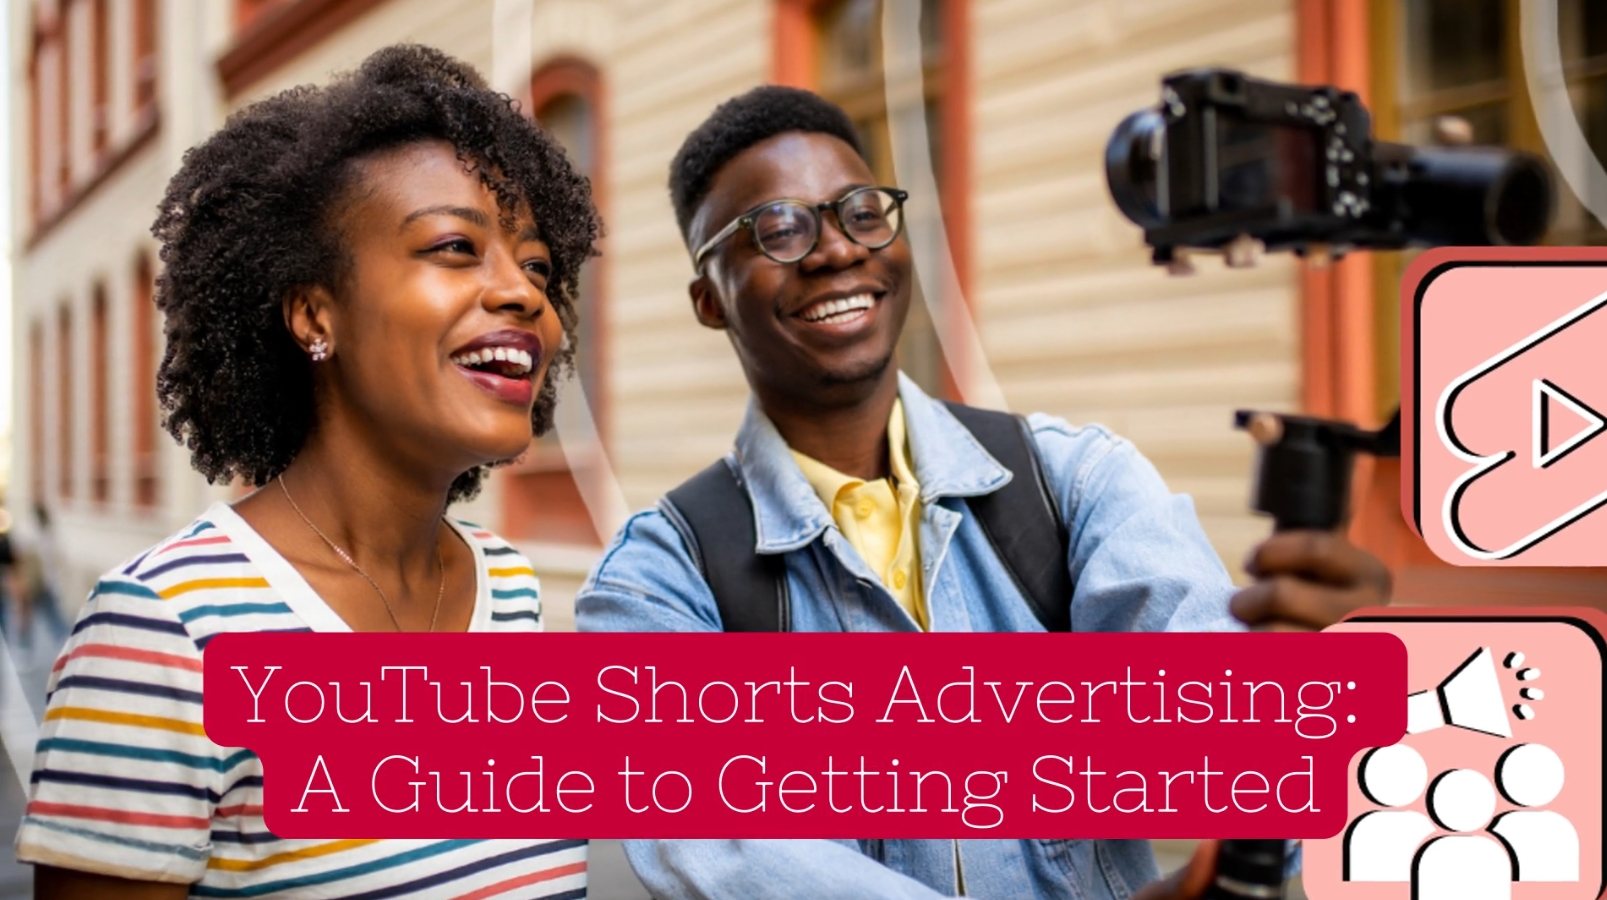 YouTube Shorts Advertising: A Guide to Getting Started